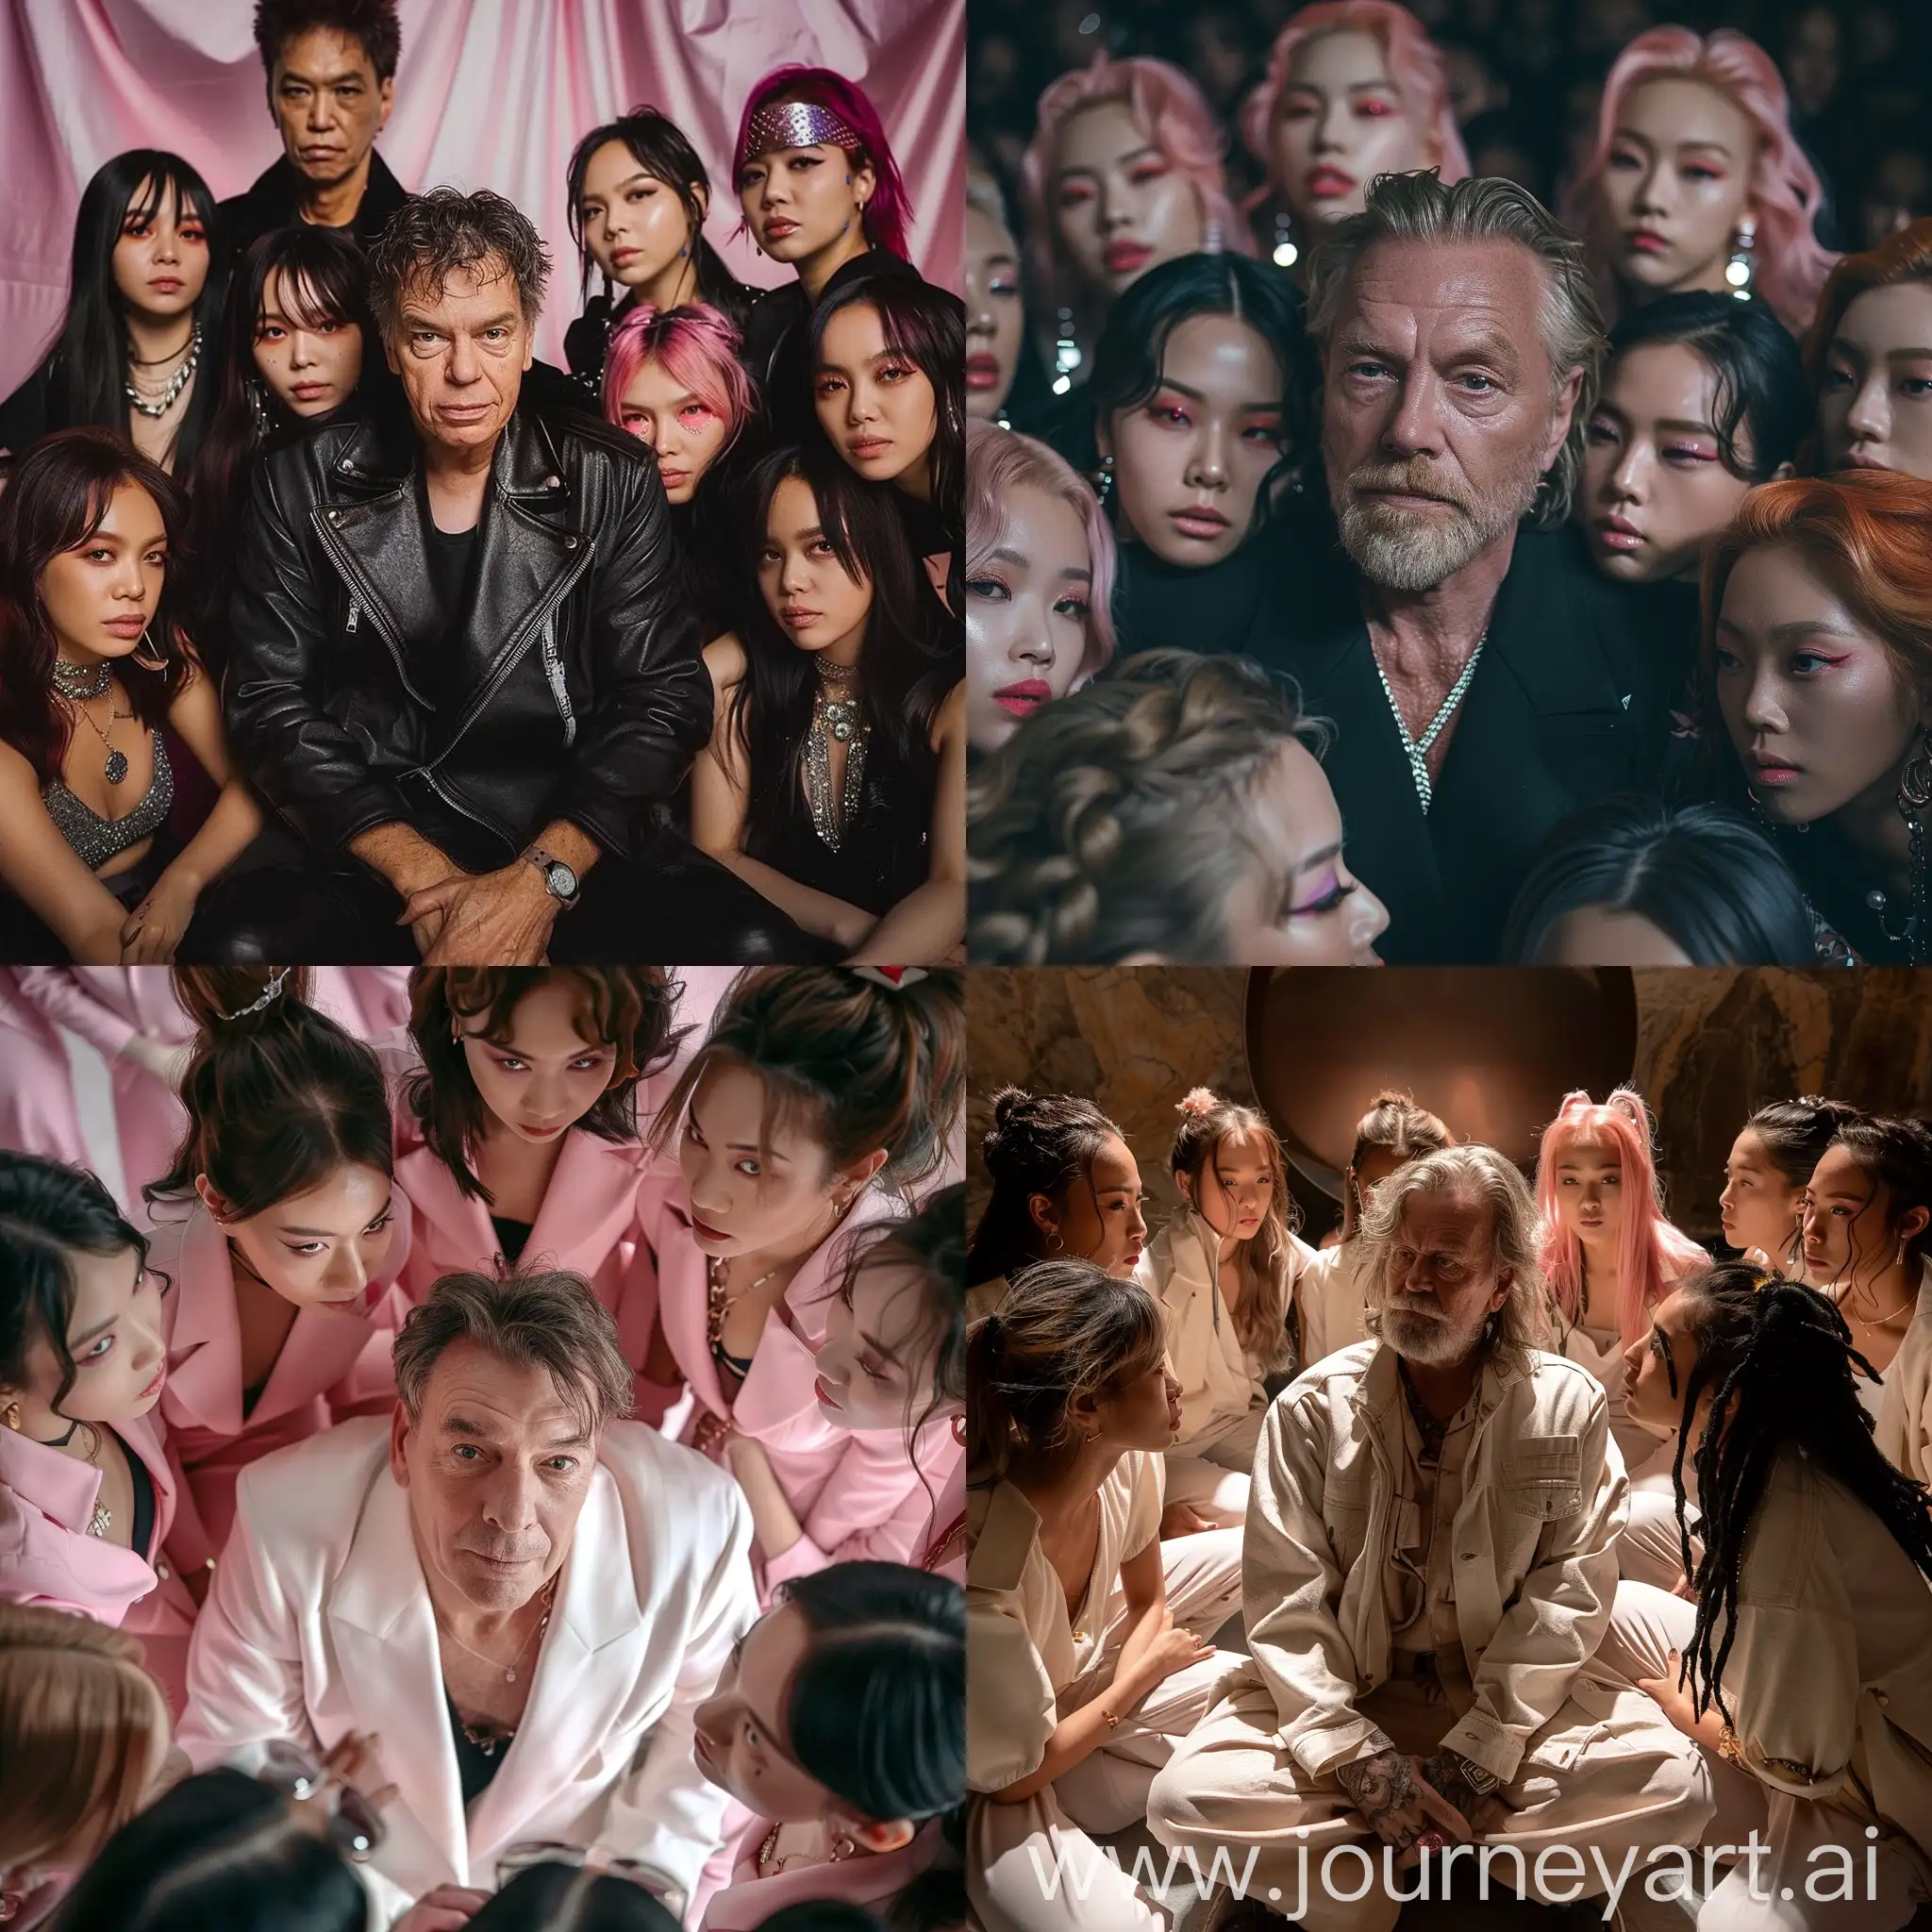 Till Lindemann surrounded by Blackpink